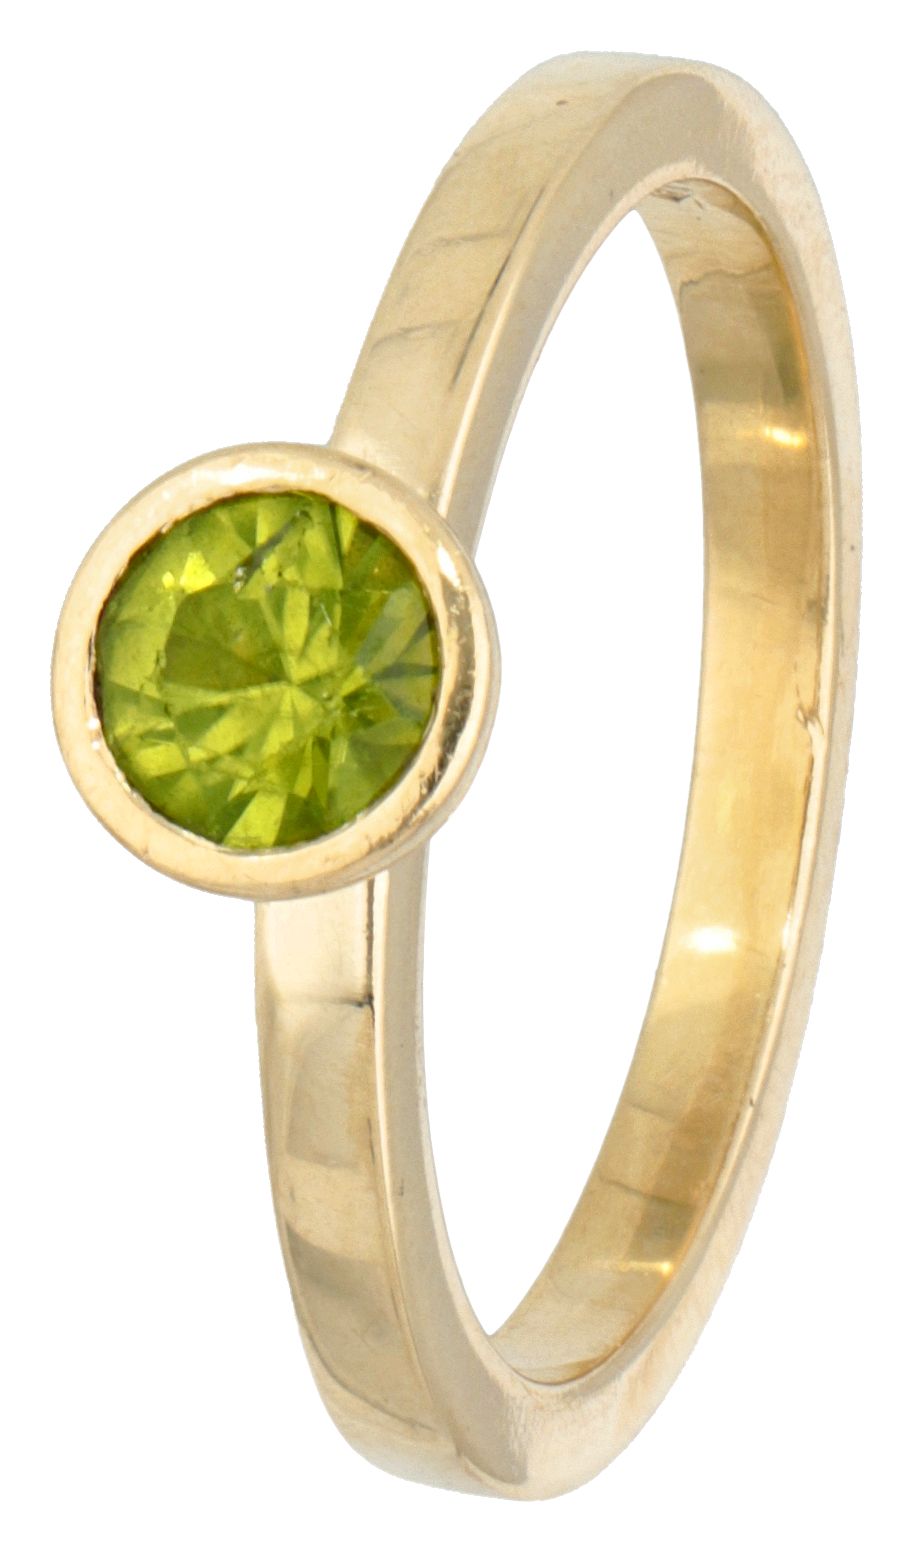 14K. Yellow gold ring set with approx. 0.45 ct. Natural peridot. 印章：585。制造者的标记。F&hellip;